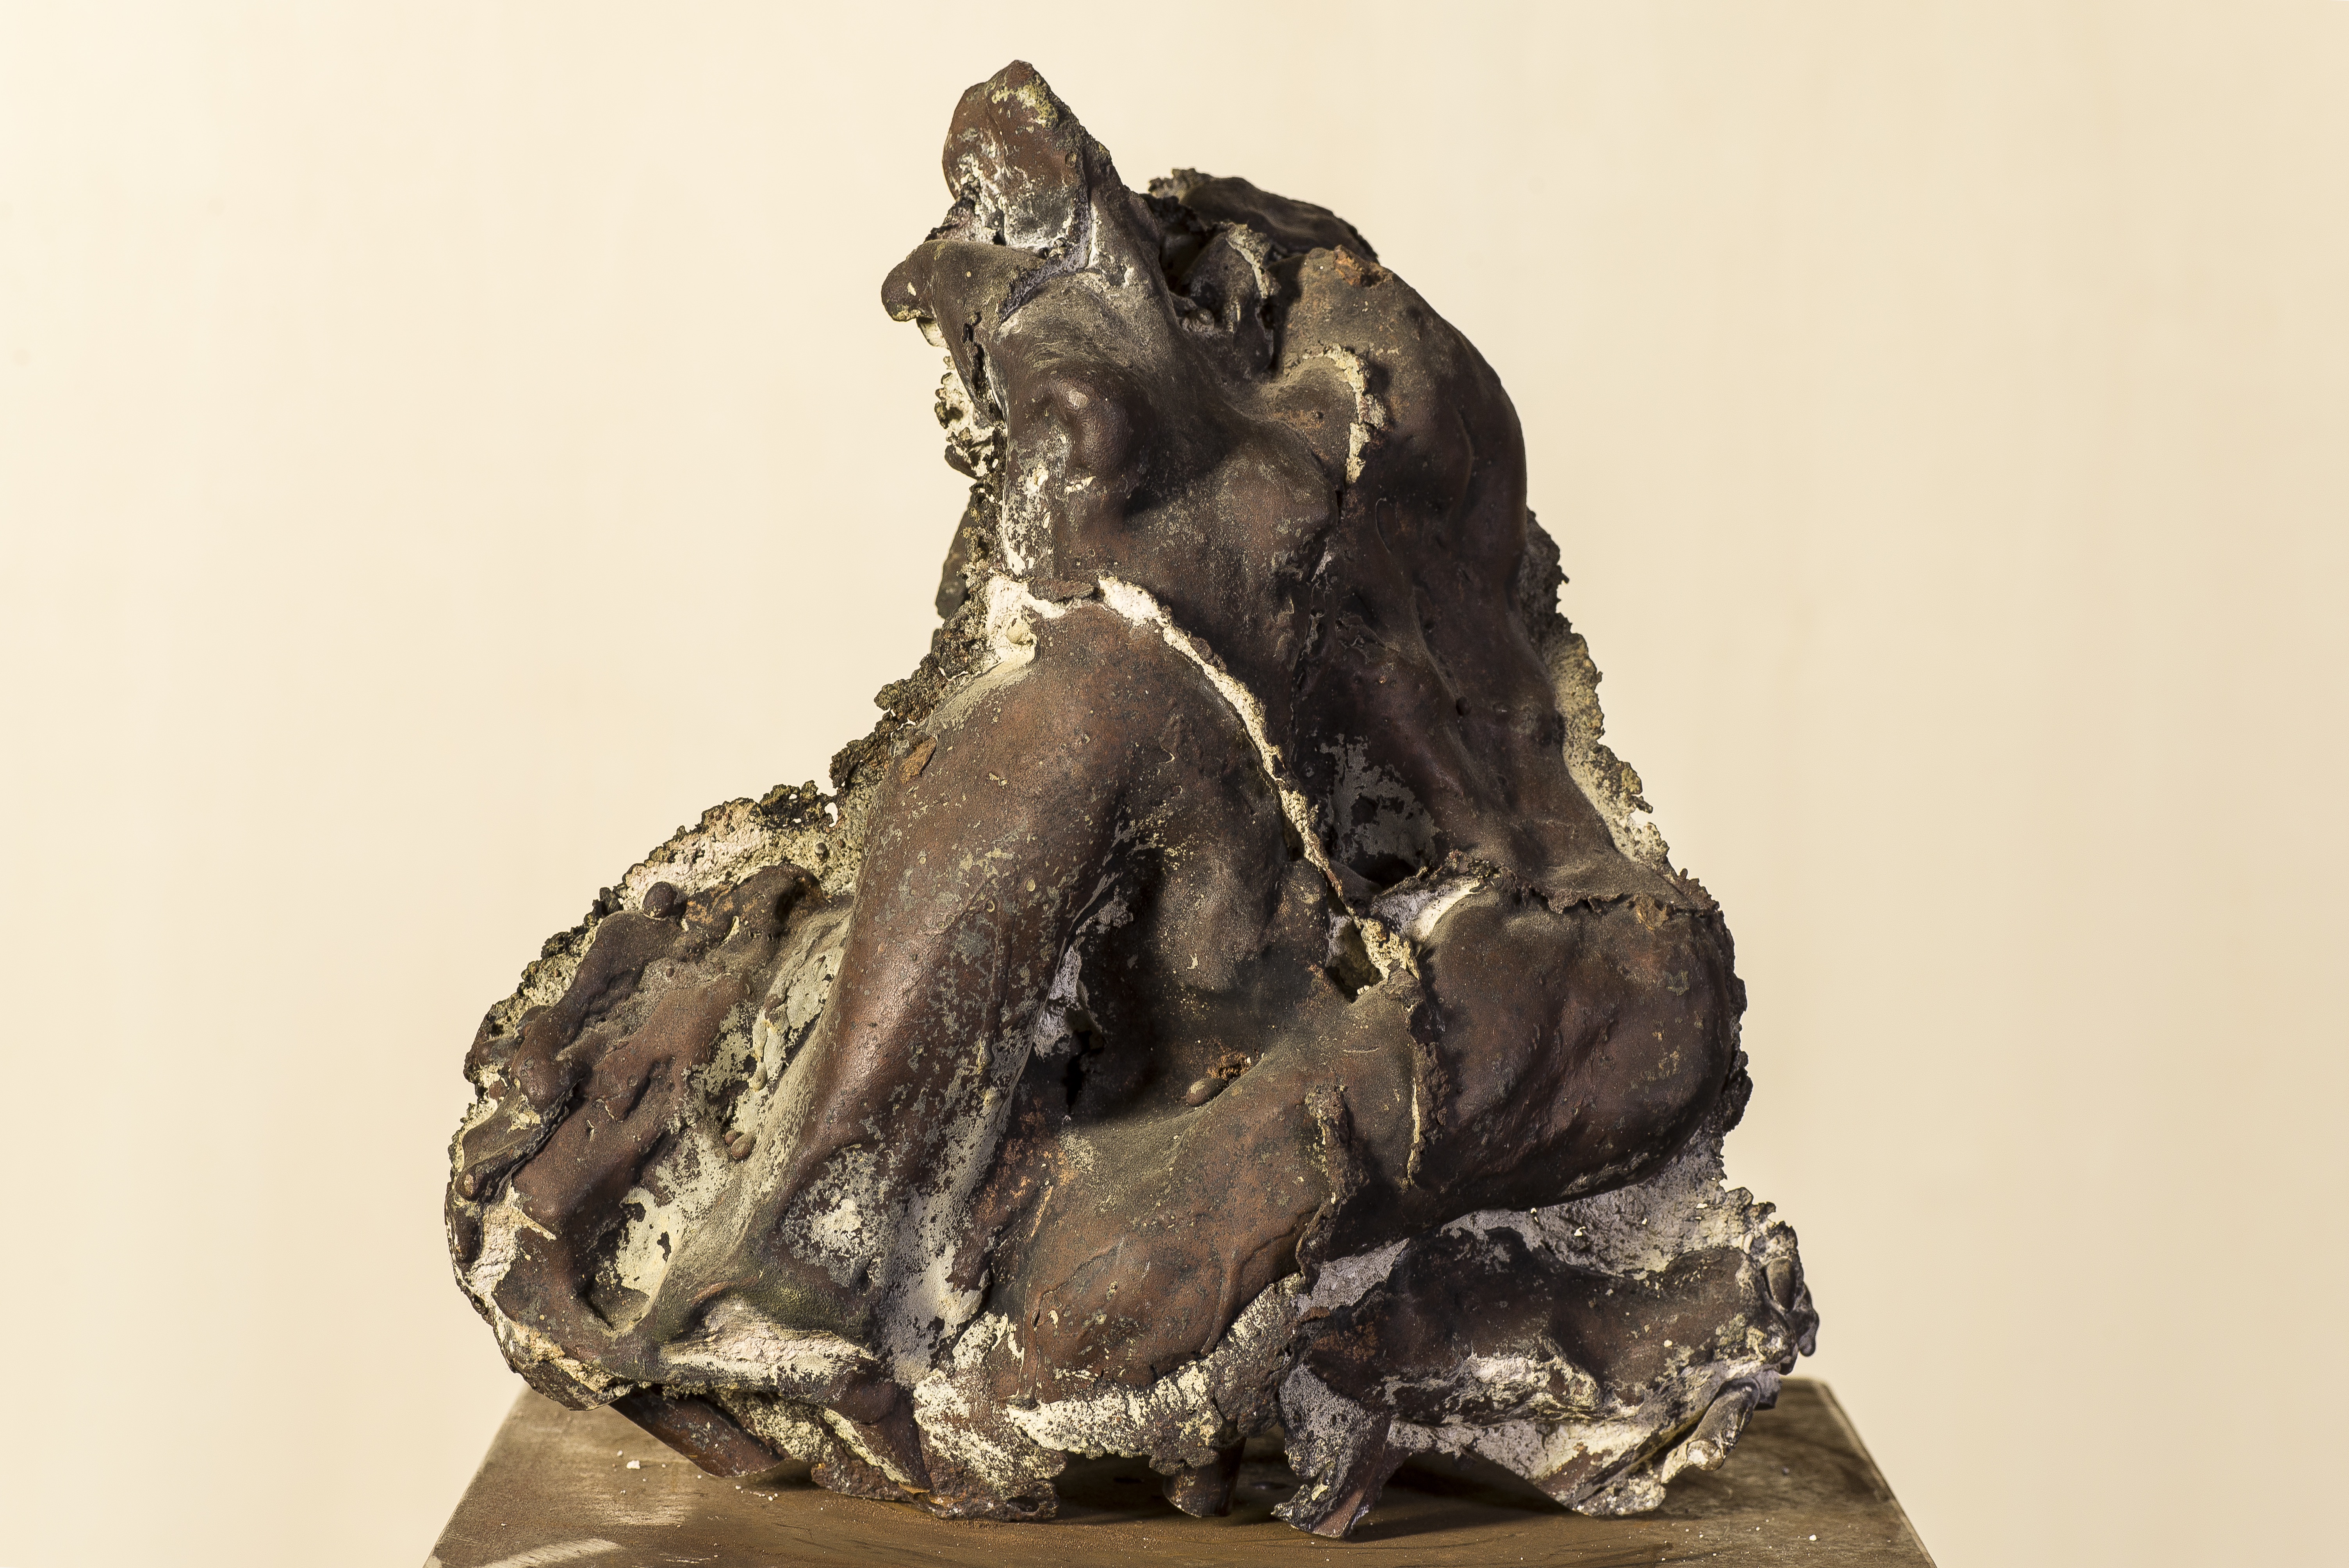 Lovers#28|bronze|cm25x24x22 |2013 | Rome, Italy |Private Collection